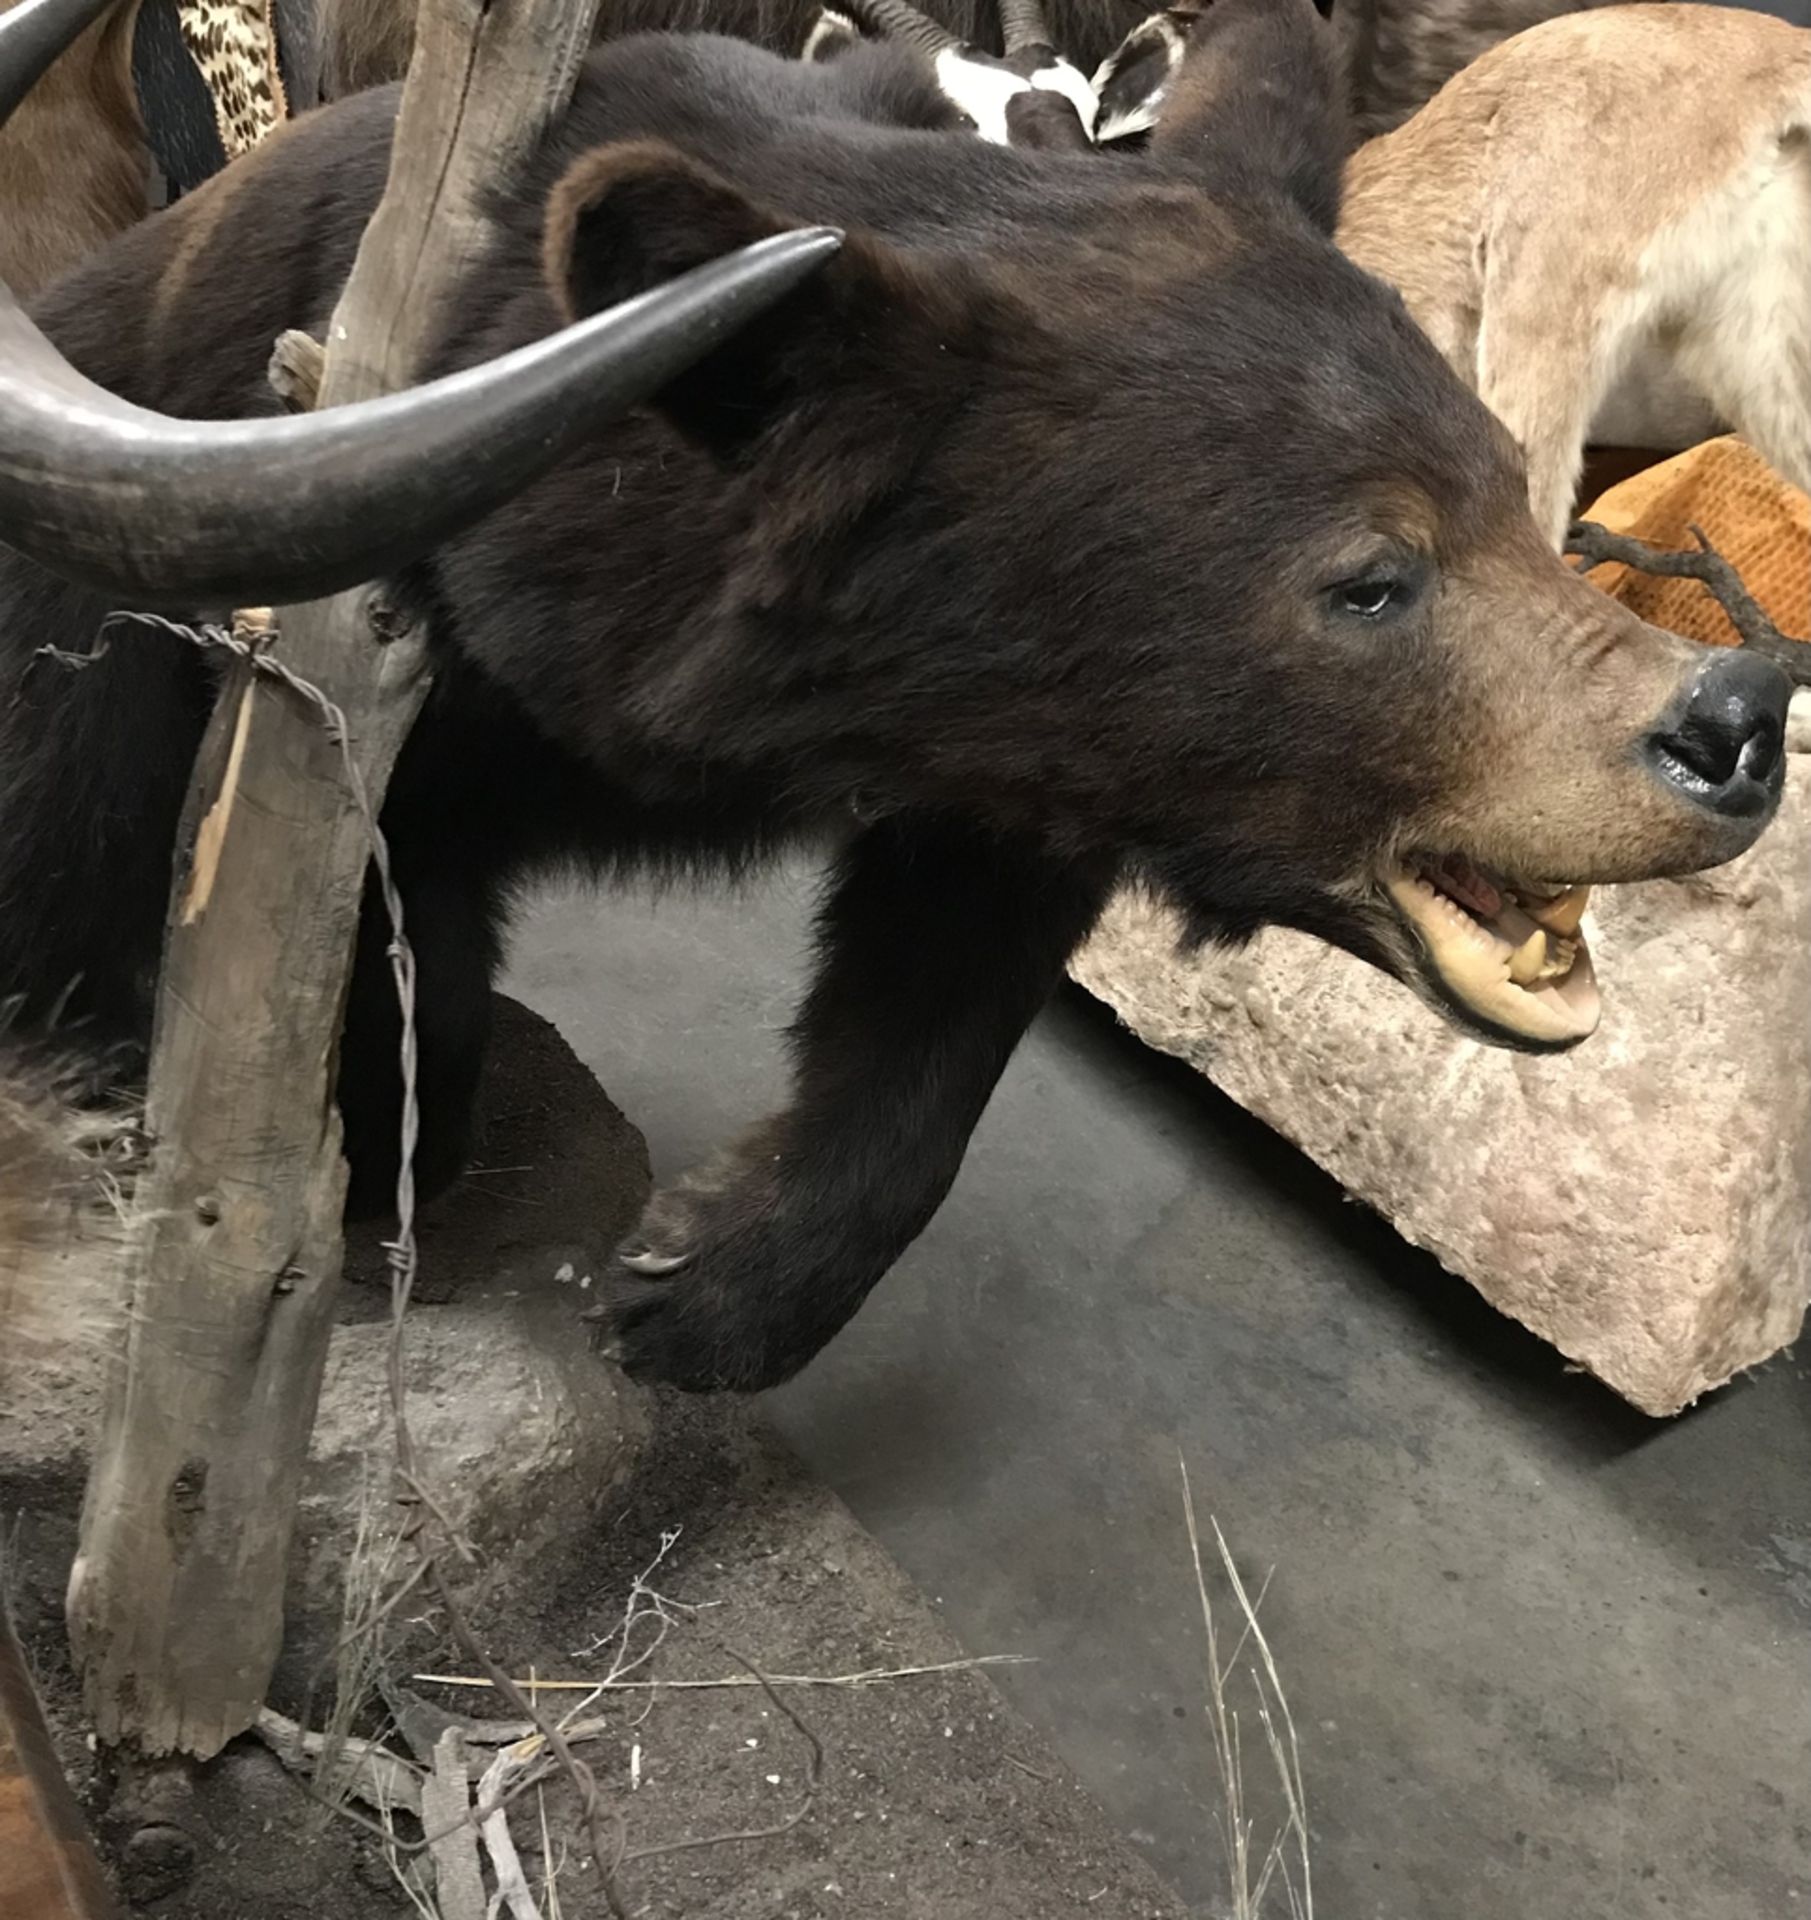 BIG BROWN BEAR WALKING NEXT TO BARBED WIRE Taxidermy